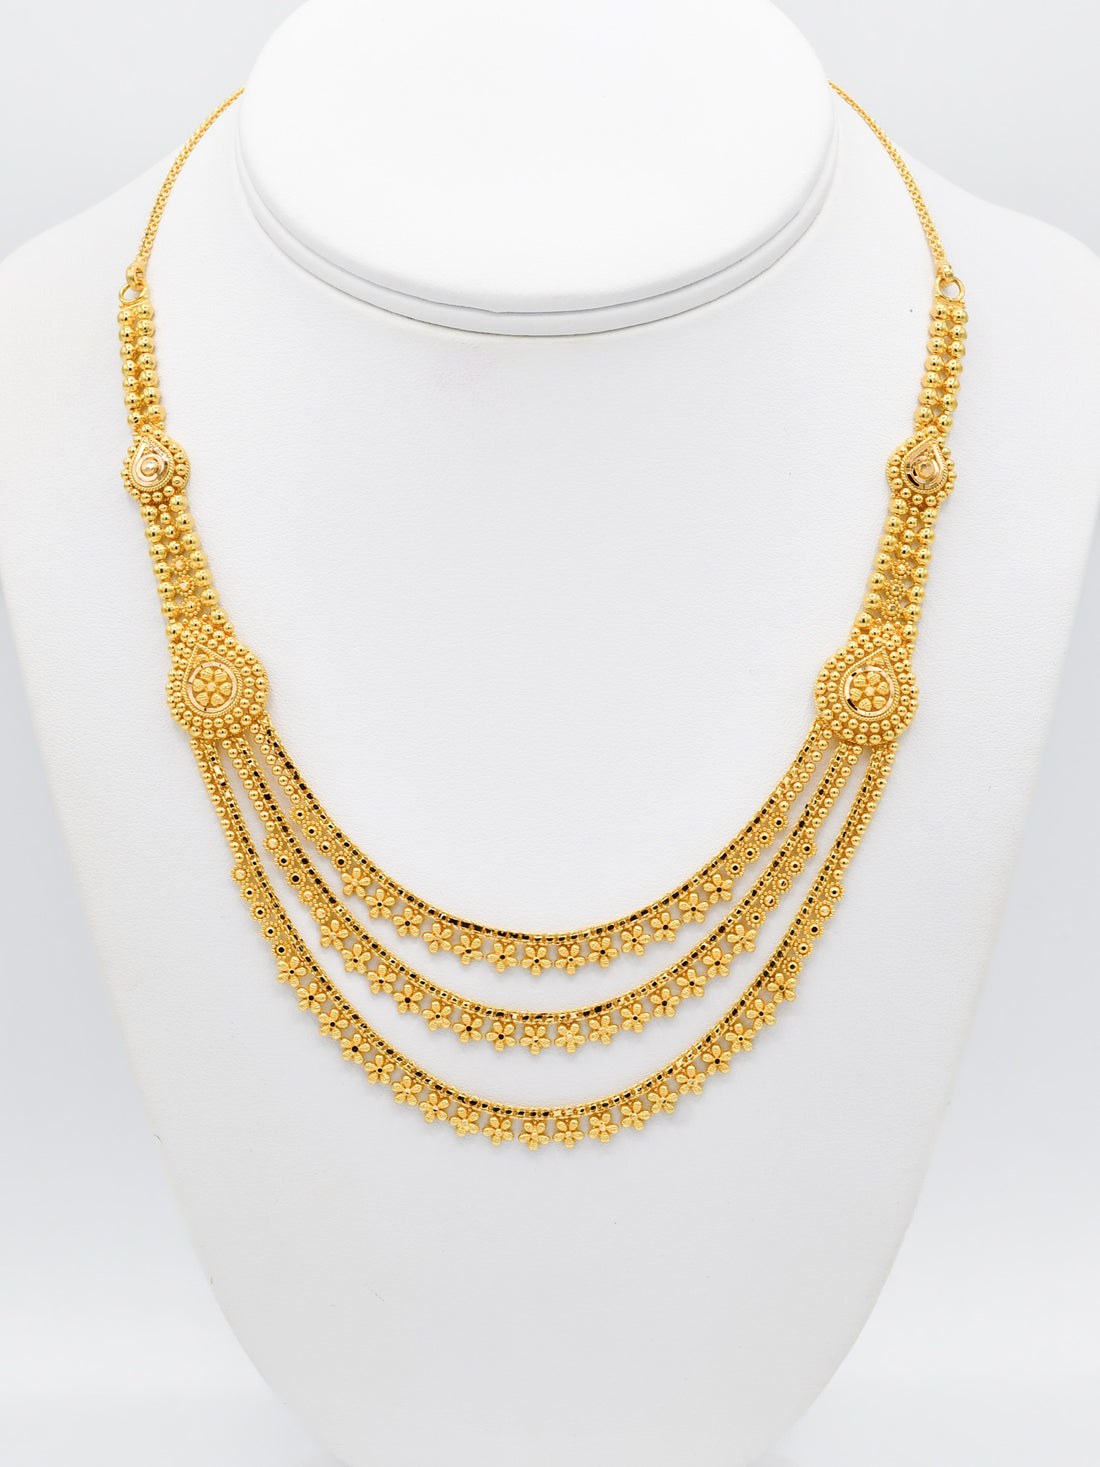 22ct Gold 3 Row Necklace Set - Roop Darshan